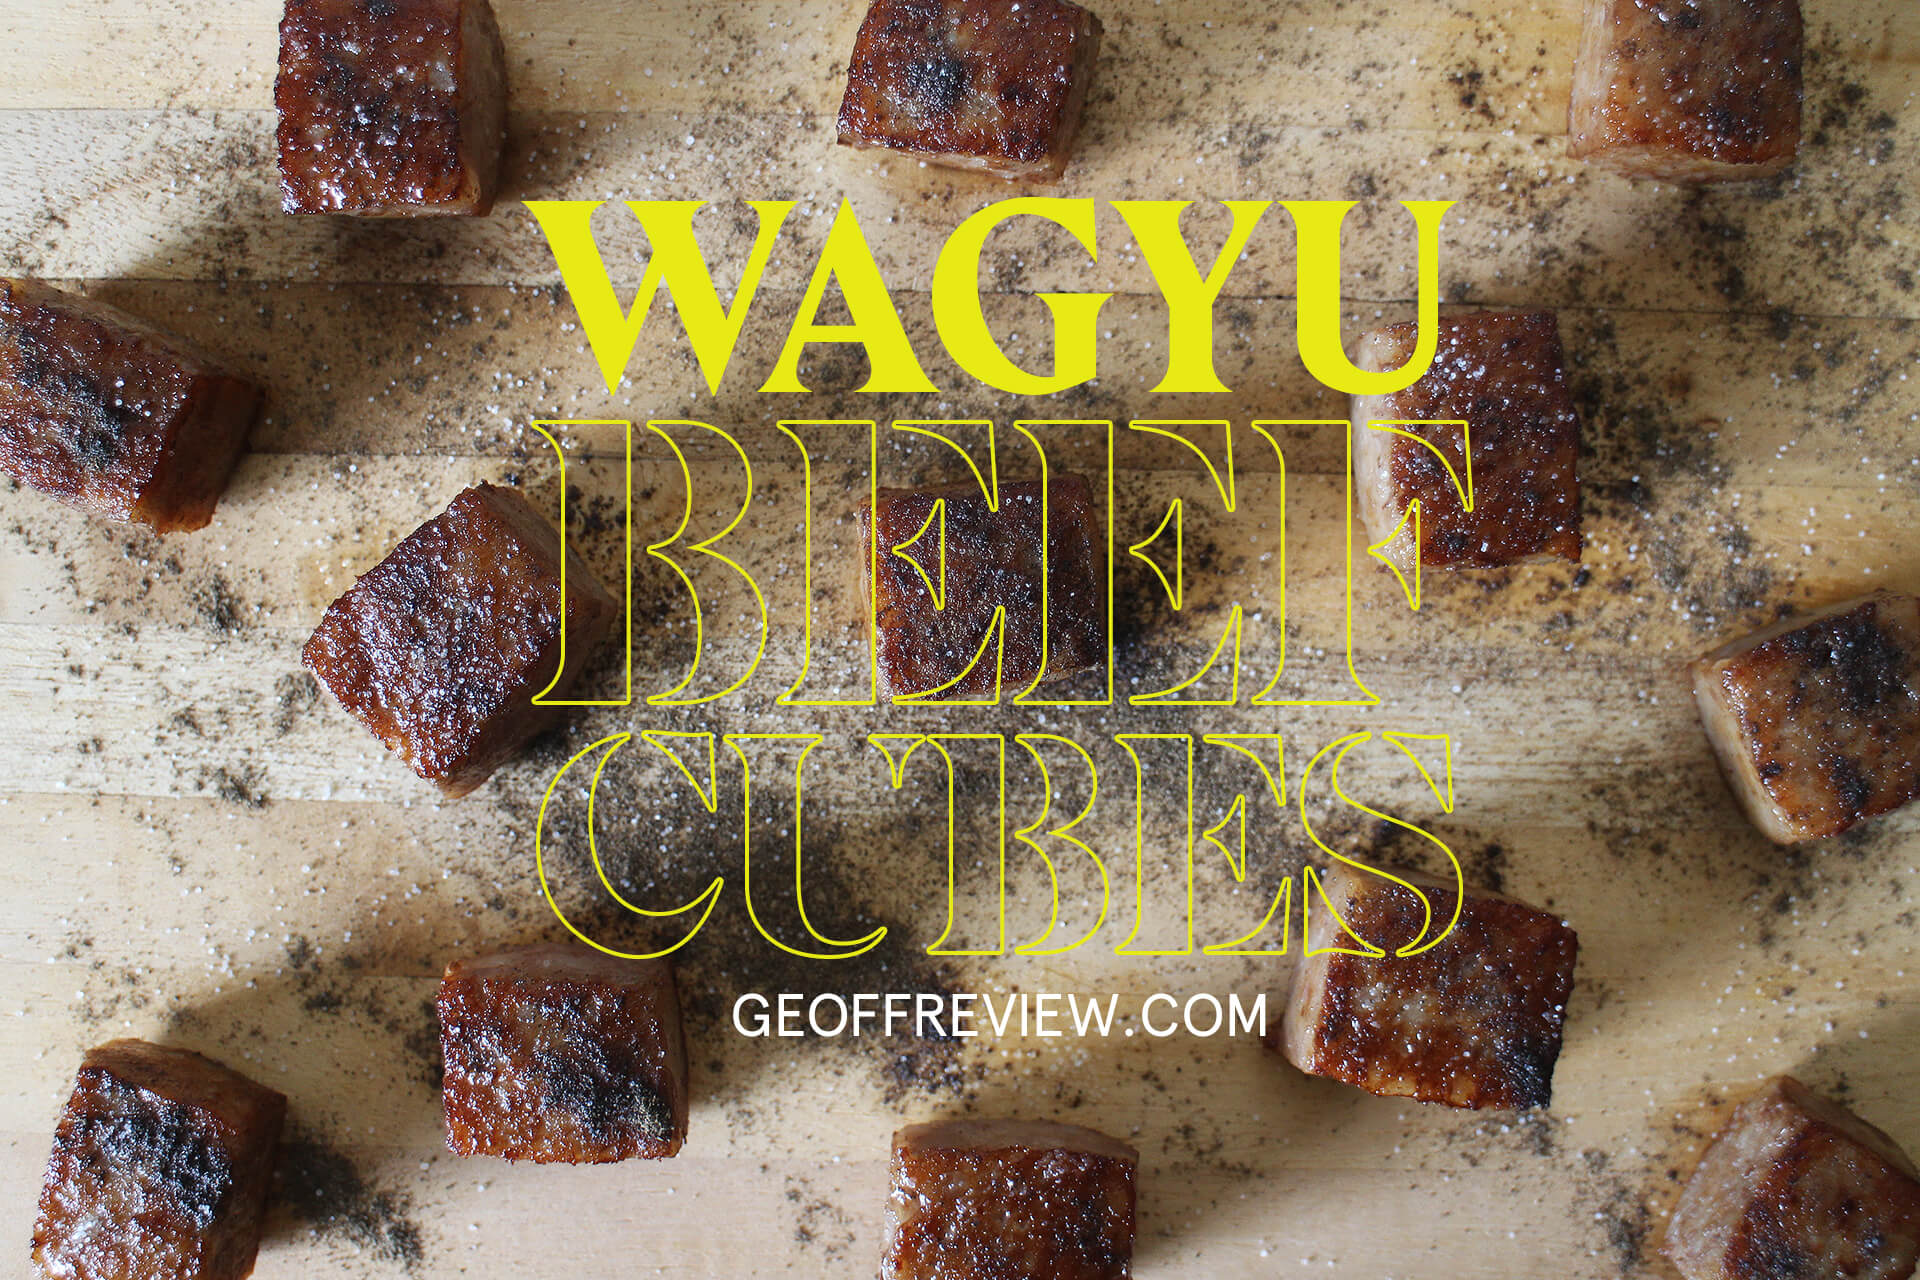 HOW TO COOK WAGYU CUBES